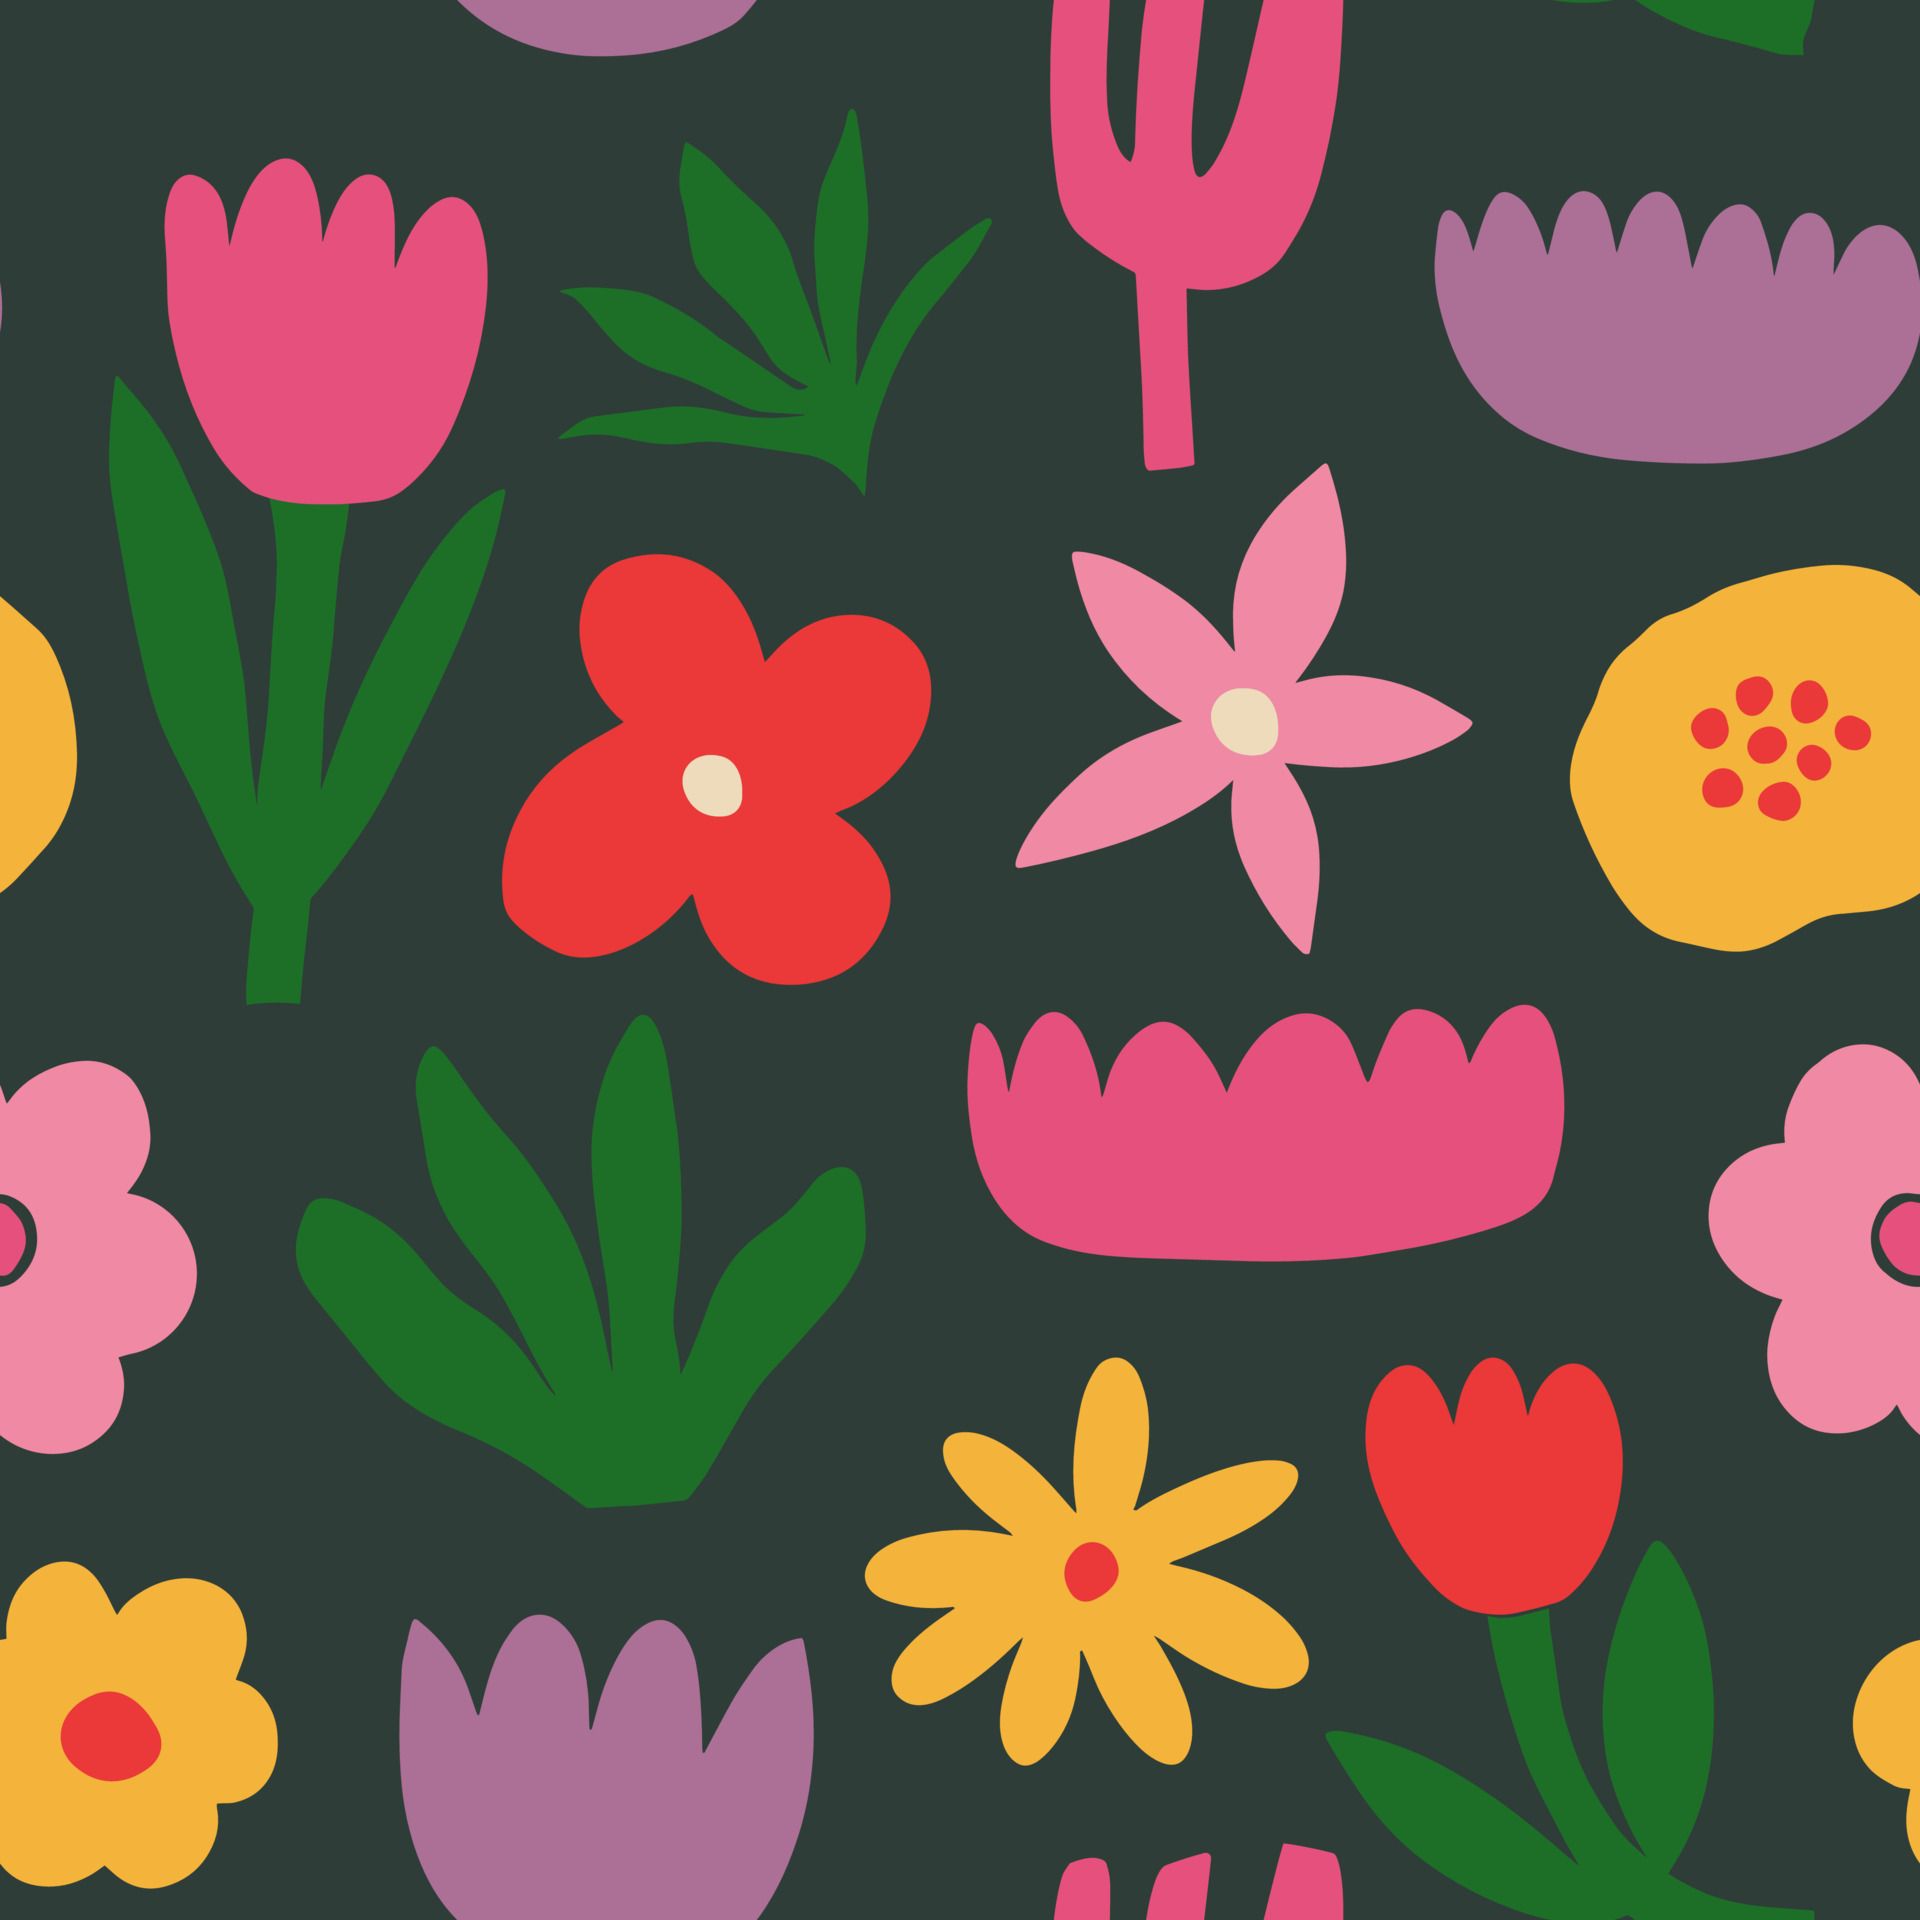 A floral pattern with pink, purple, yellow, and red flowers on a dark green background - 70s